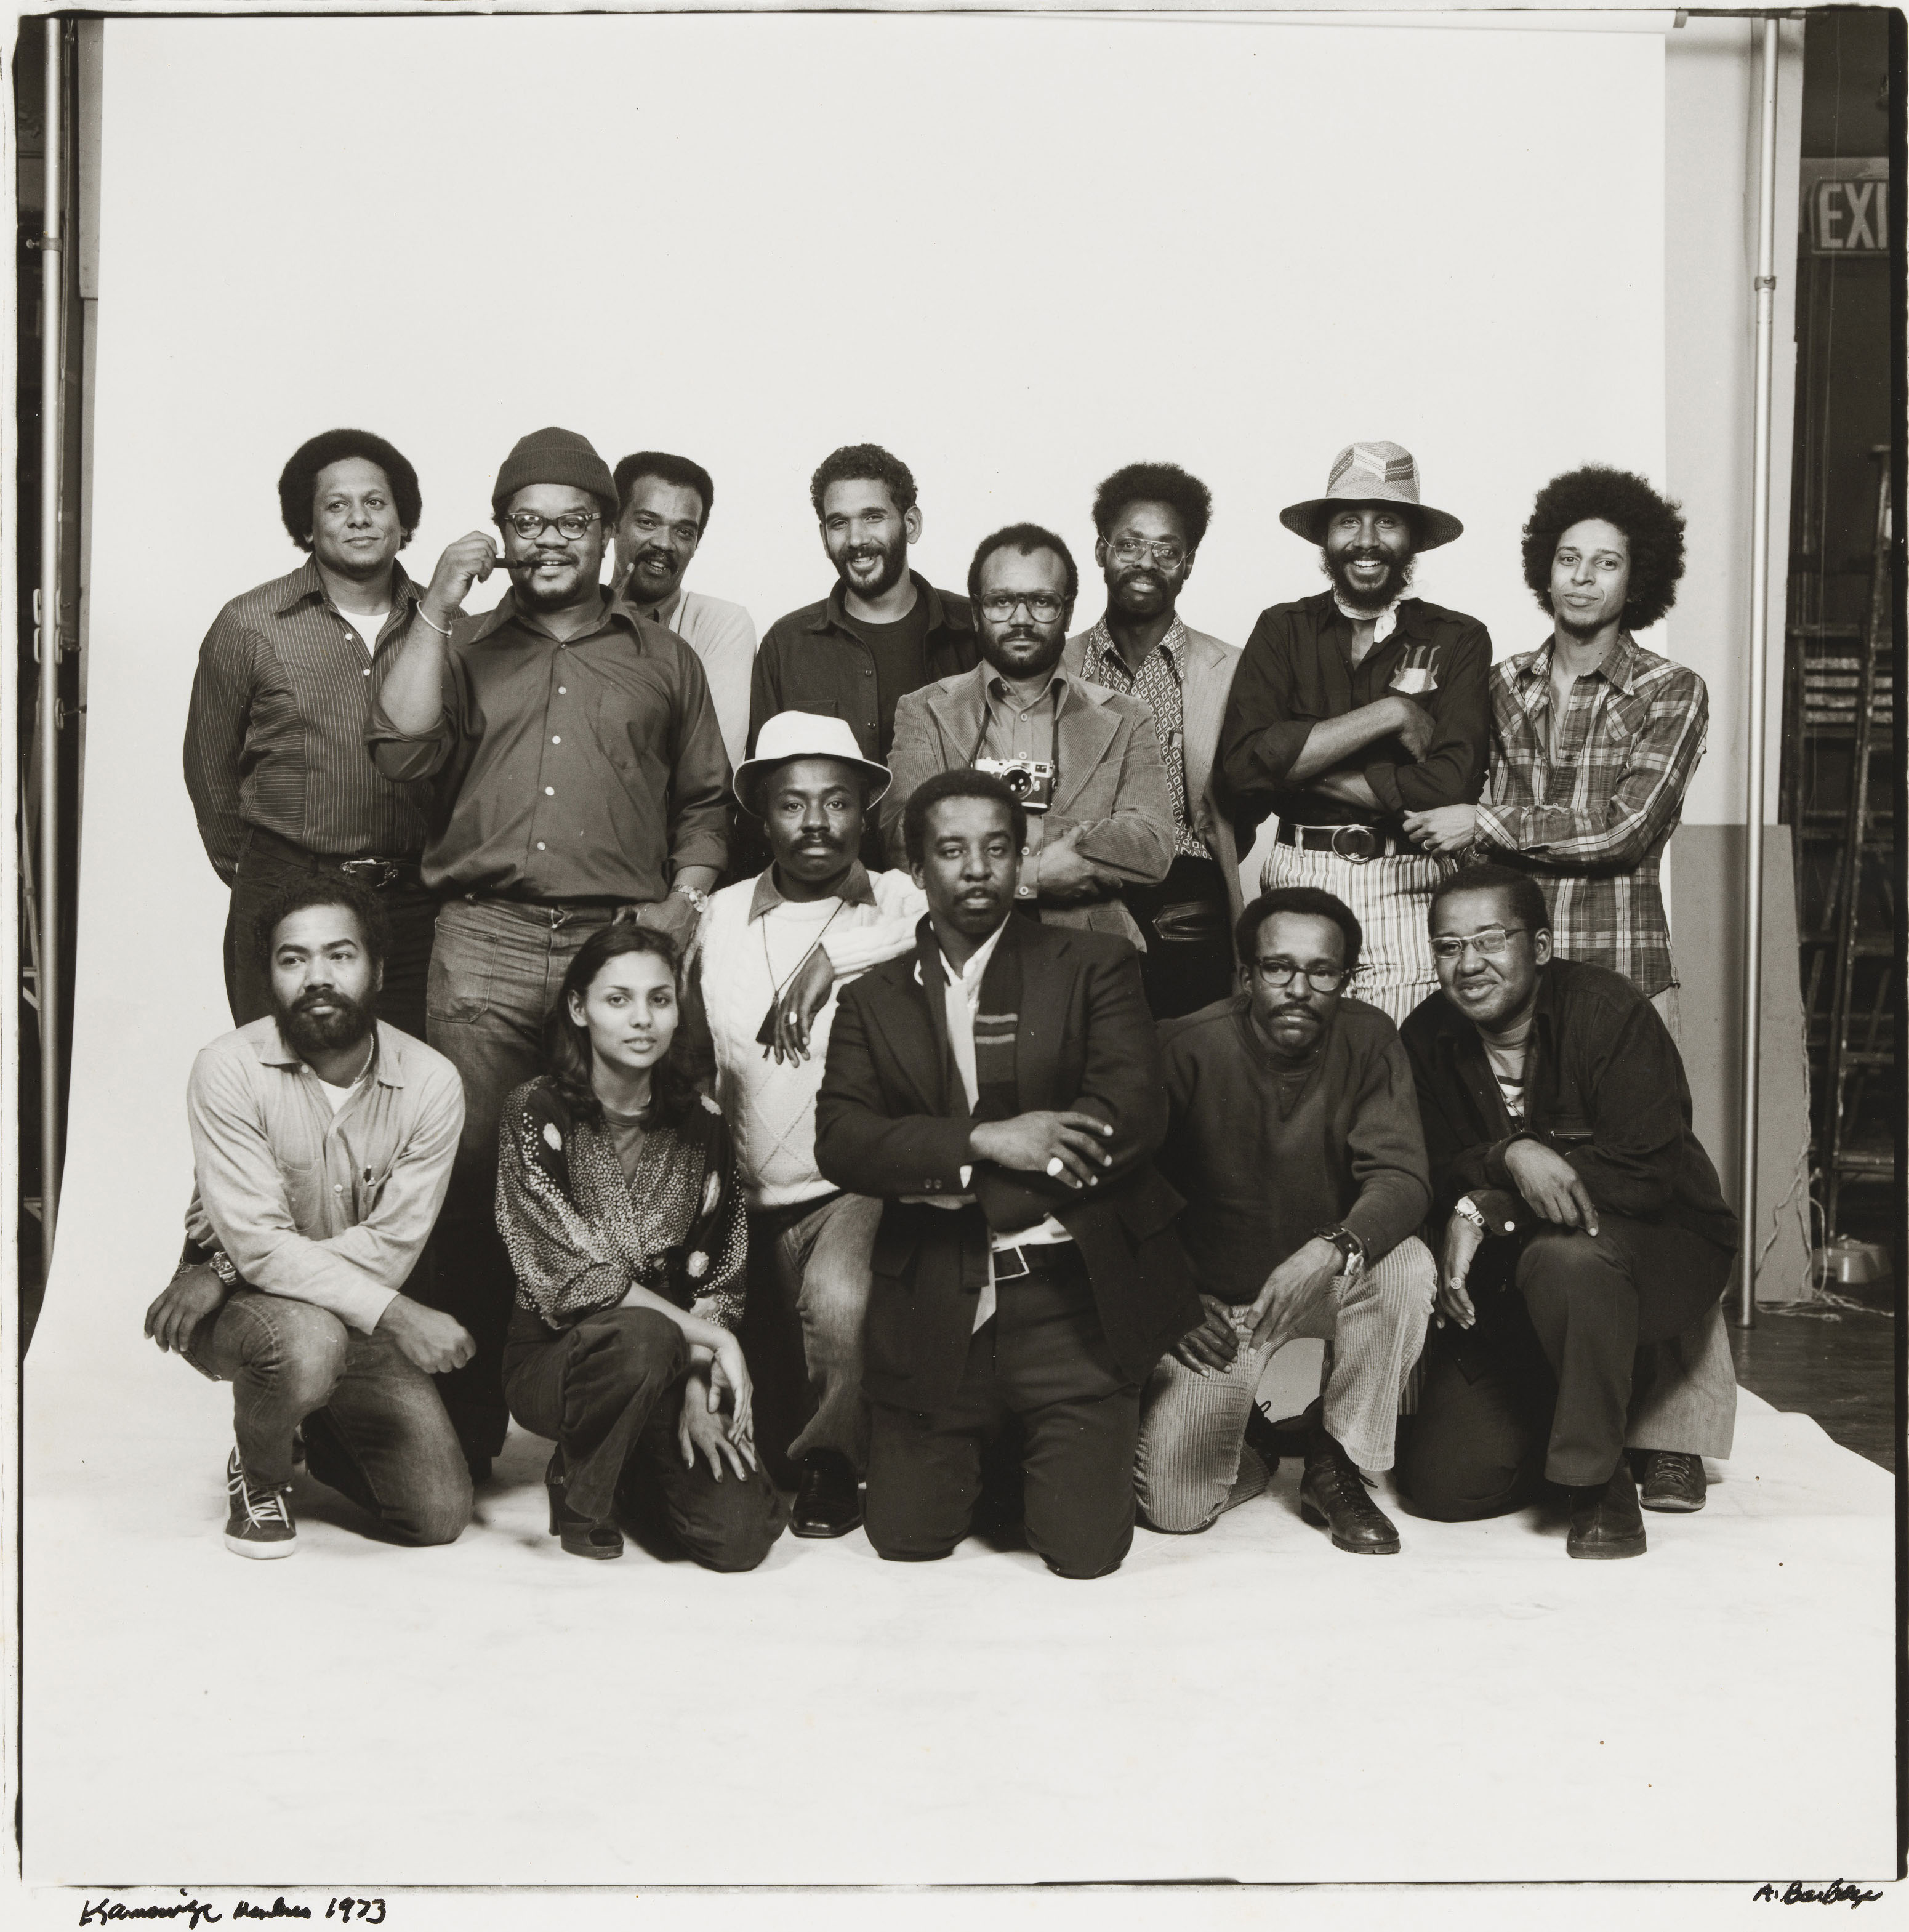 Anthony Barboza, Kamoinge Portrait, 1973. Whitney Museum of American Art, New York; purchase with funds from the Jack E. Chachkes Endowed Purchase Fund 2020.55. © Anthony Barboza